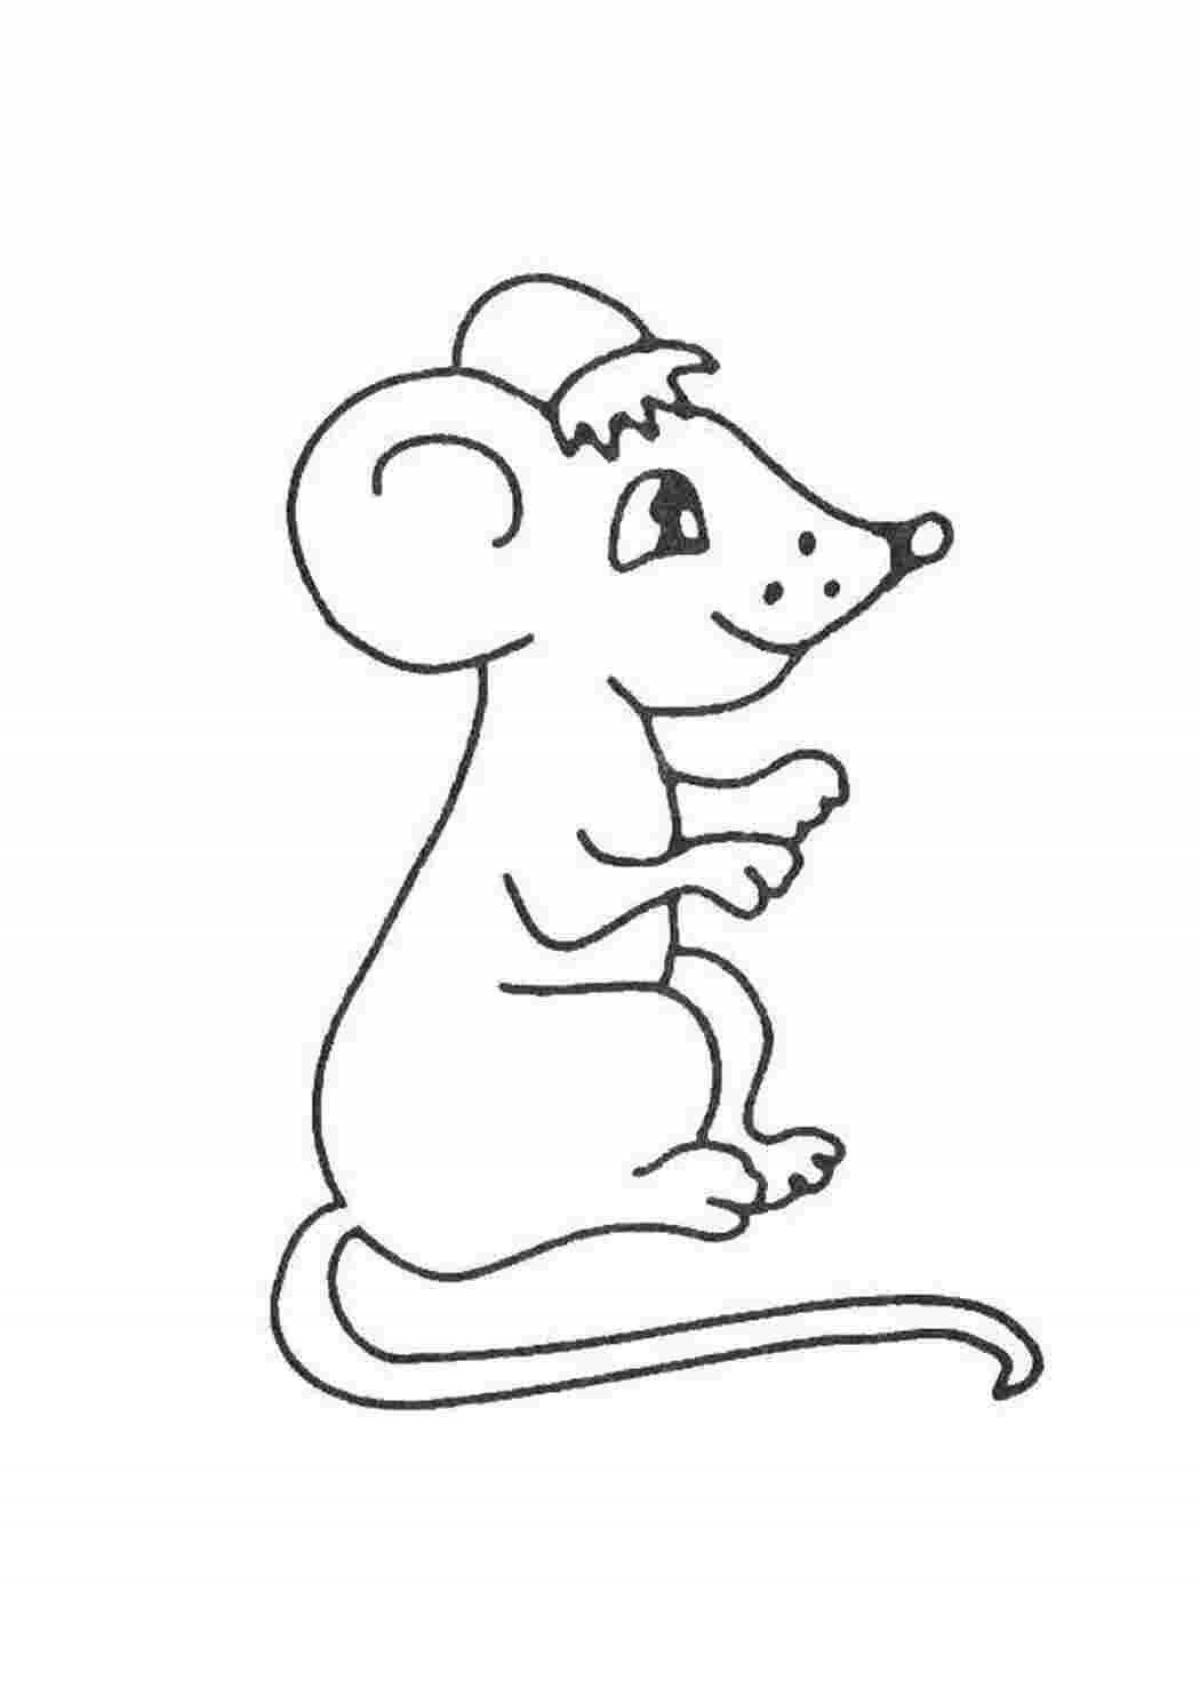 Color-frenzy mouse coloring pages for kids